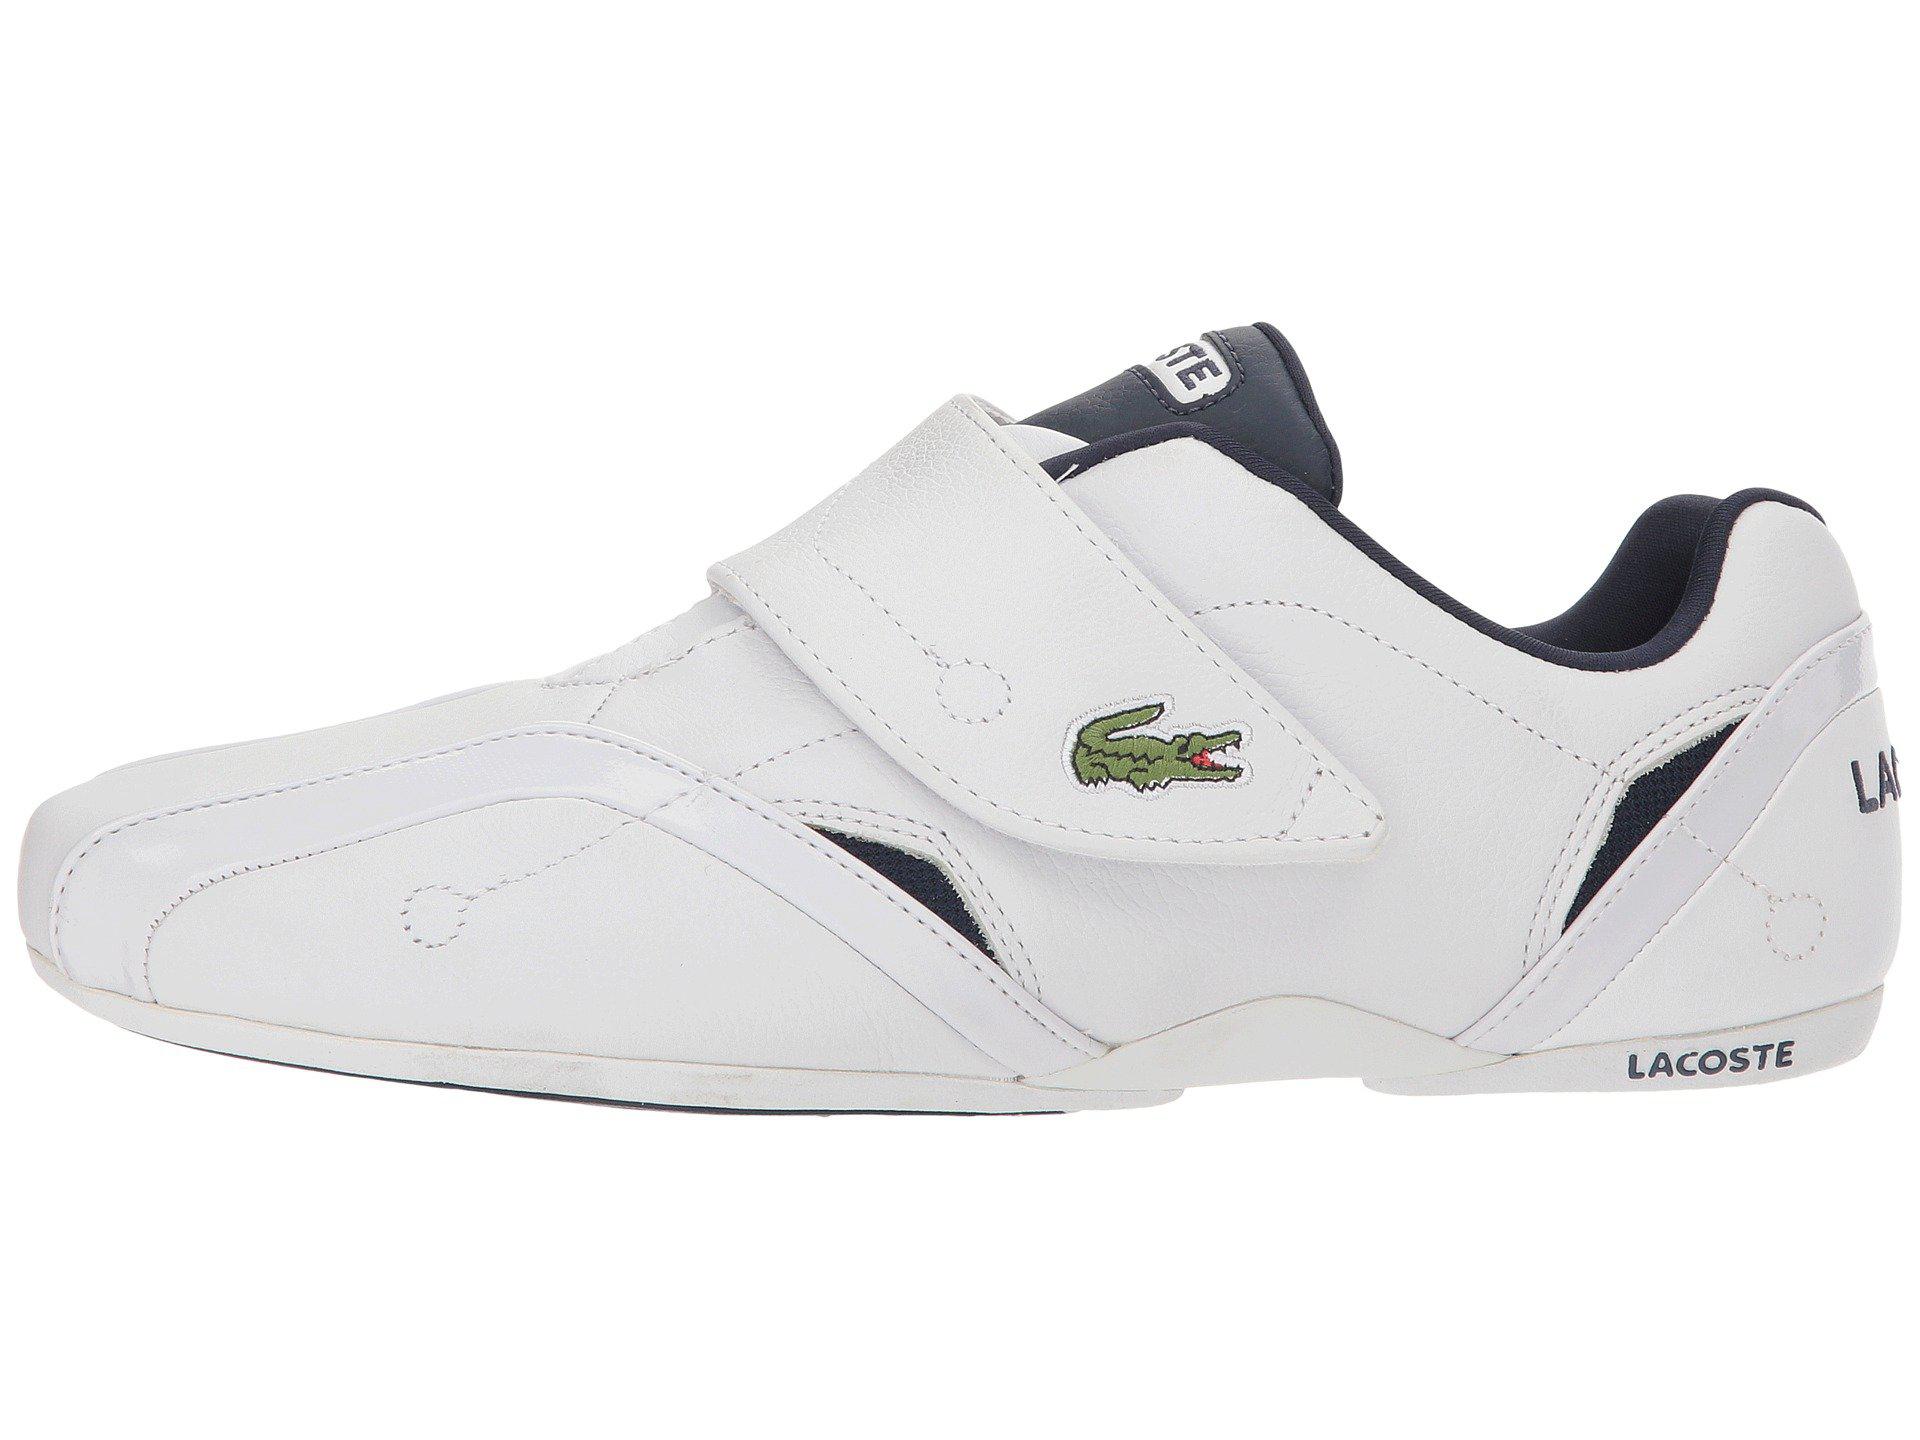 Lacoste Leather Protect Lcr in White/Dark Blue (White) for Men - Lyst